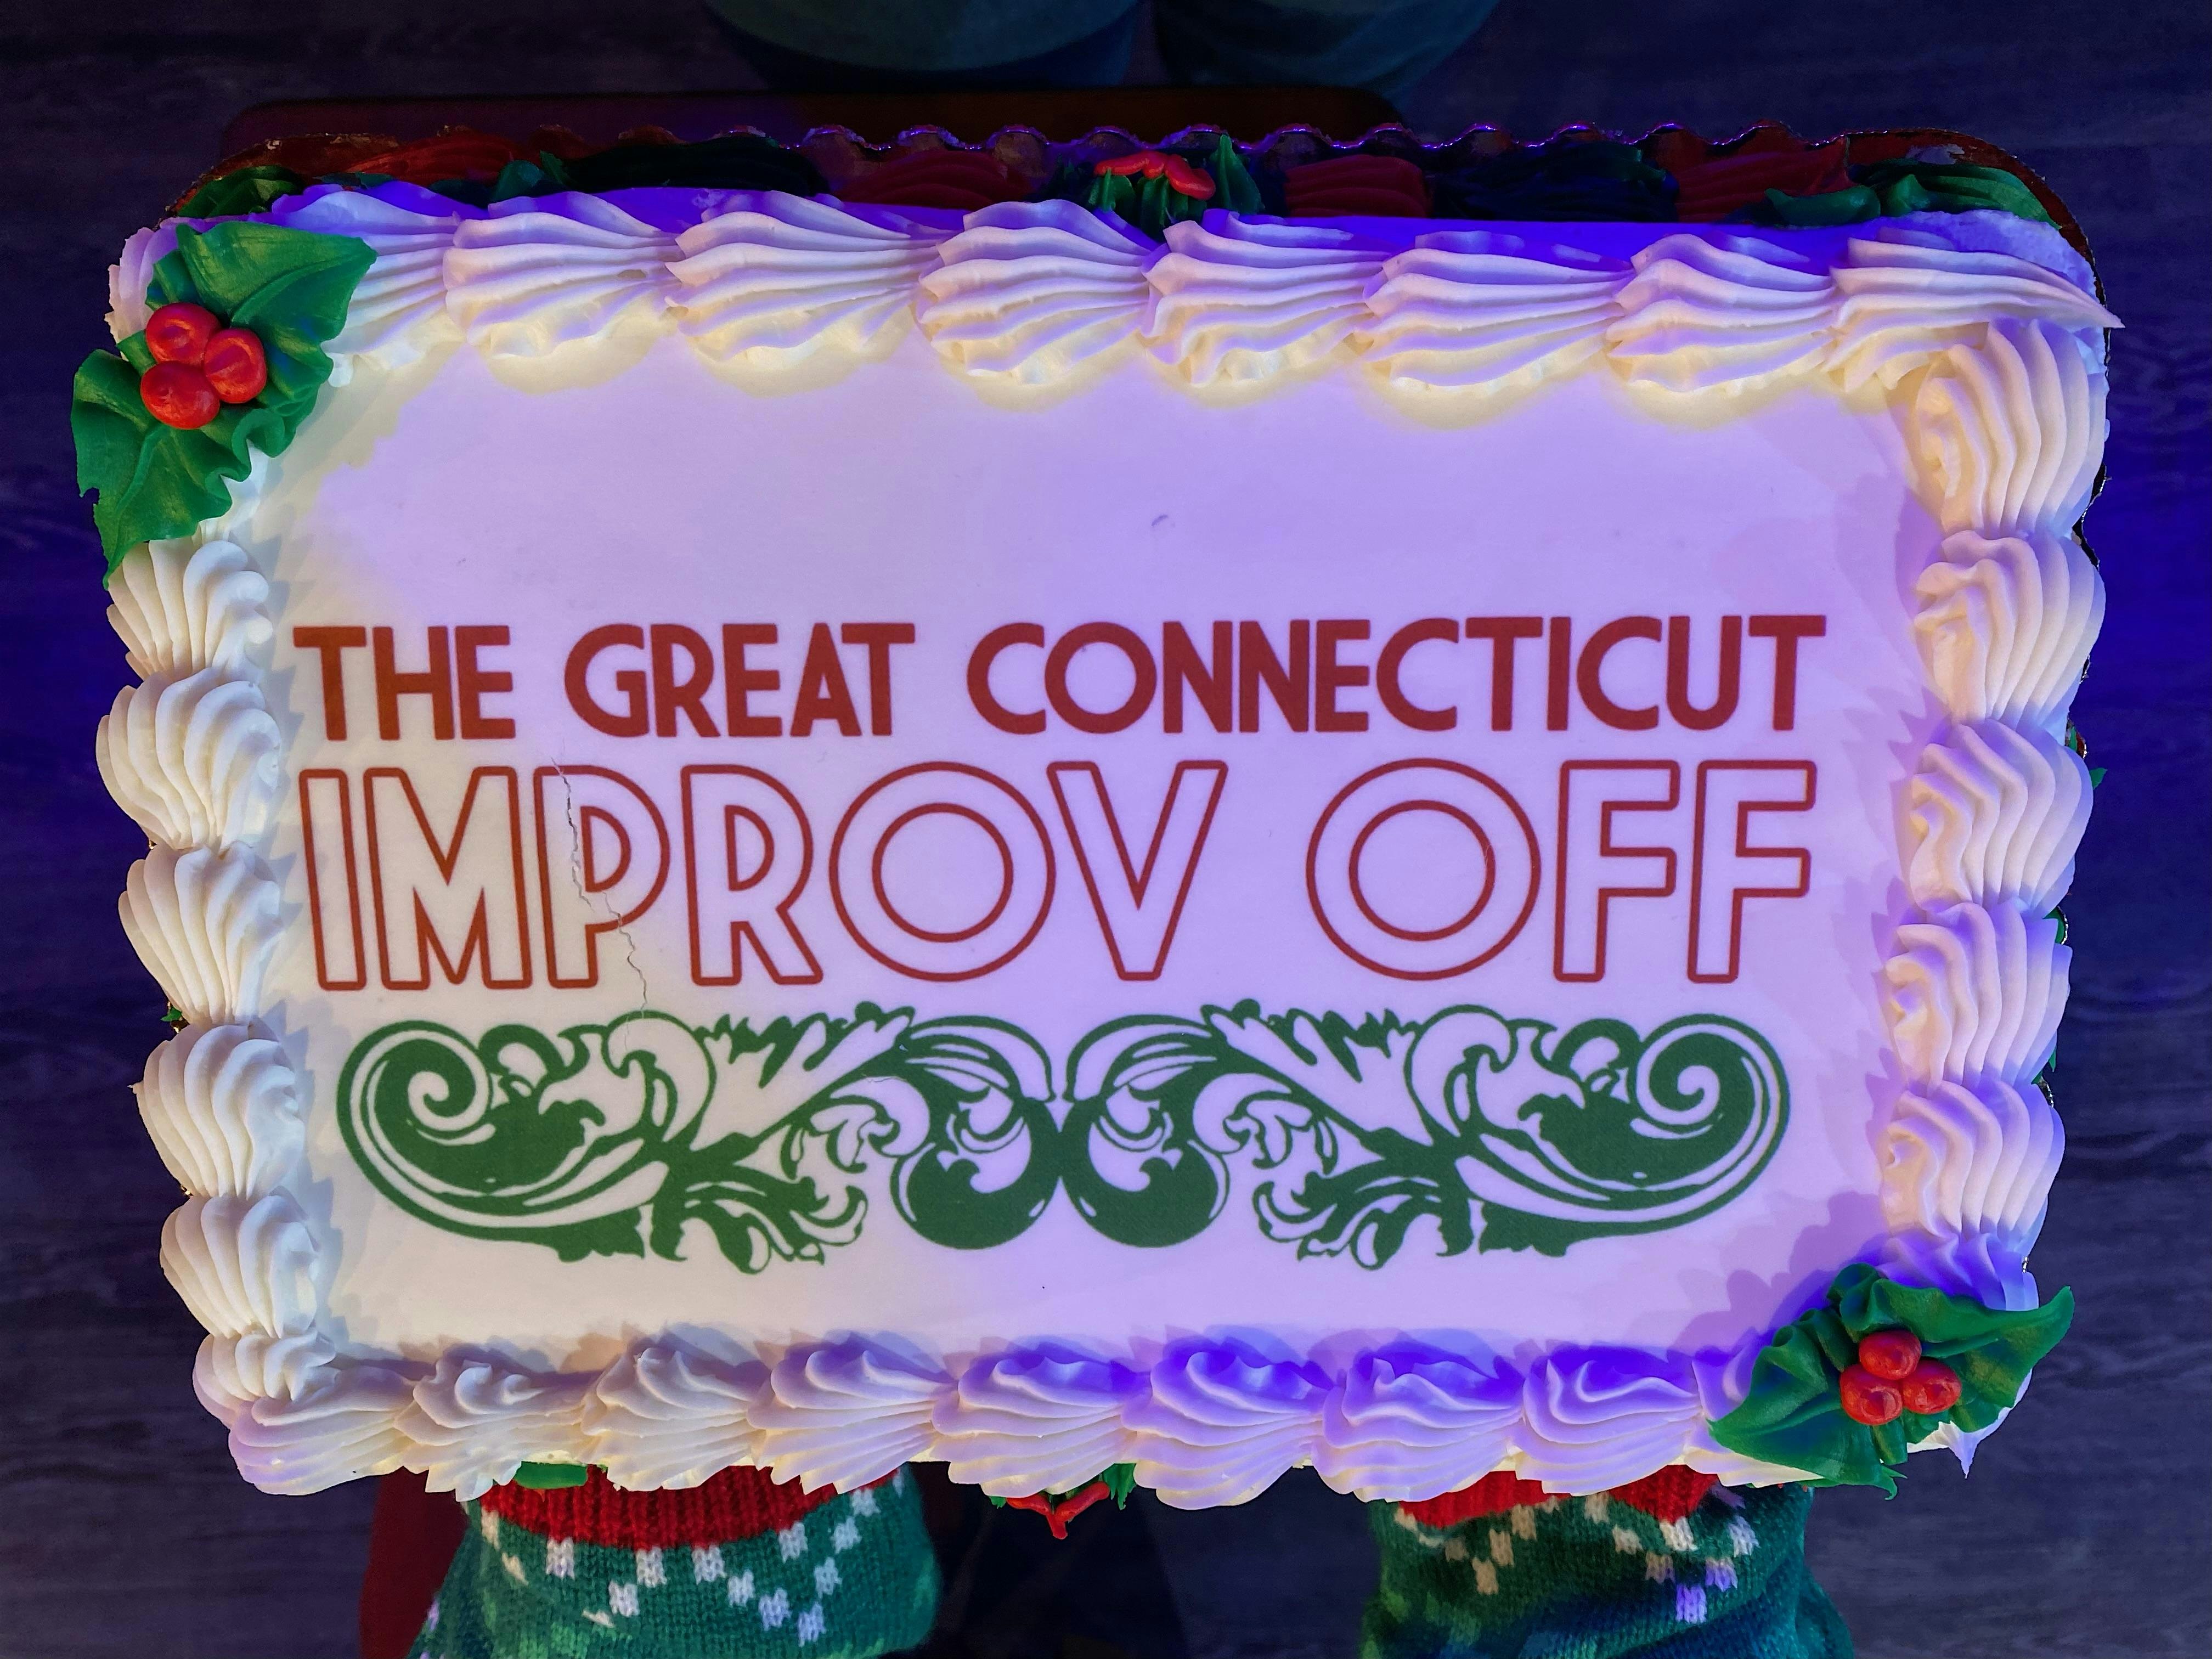 The Great Connecticut Improv Off: Holiday Edition - A Fake Competition Show